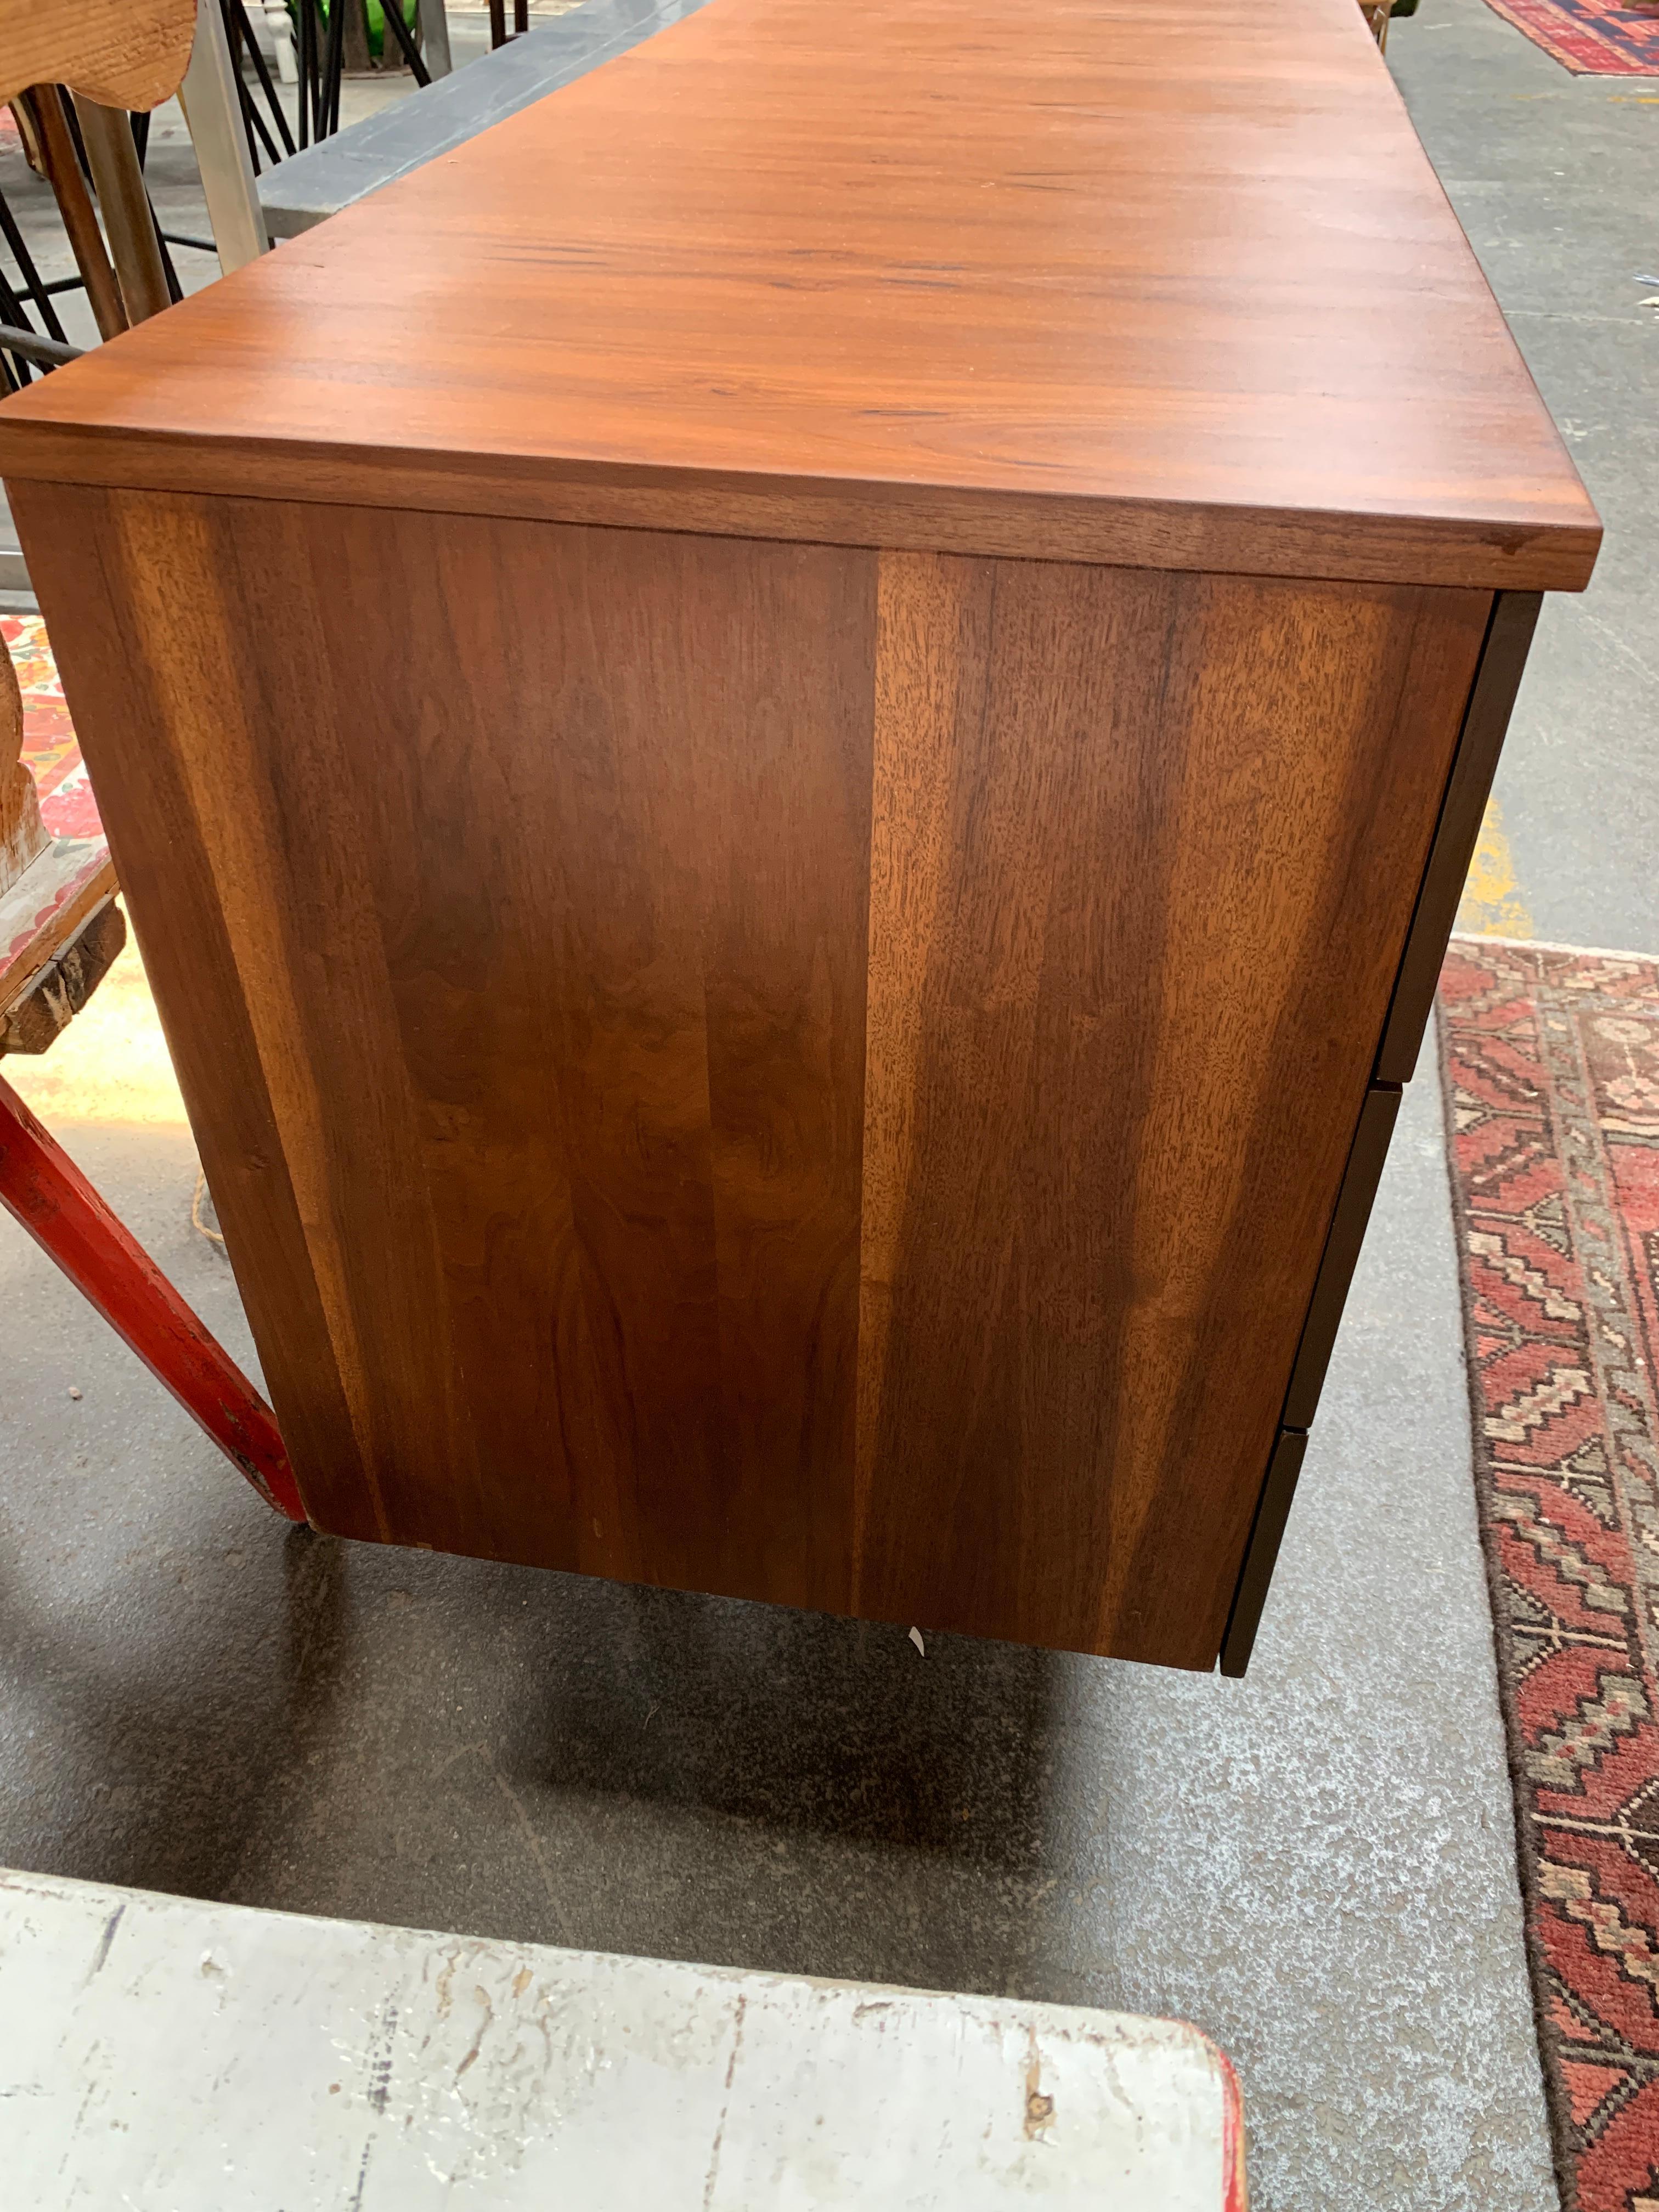 Classic mid century knee hole desk by Stanley Furniture. Four drawers with Brass pulls, Walnut stained wood construction. 

Measures: 46